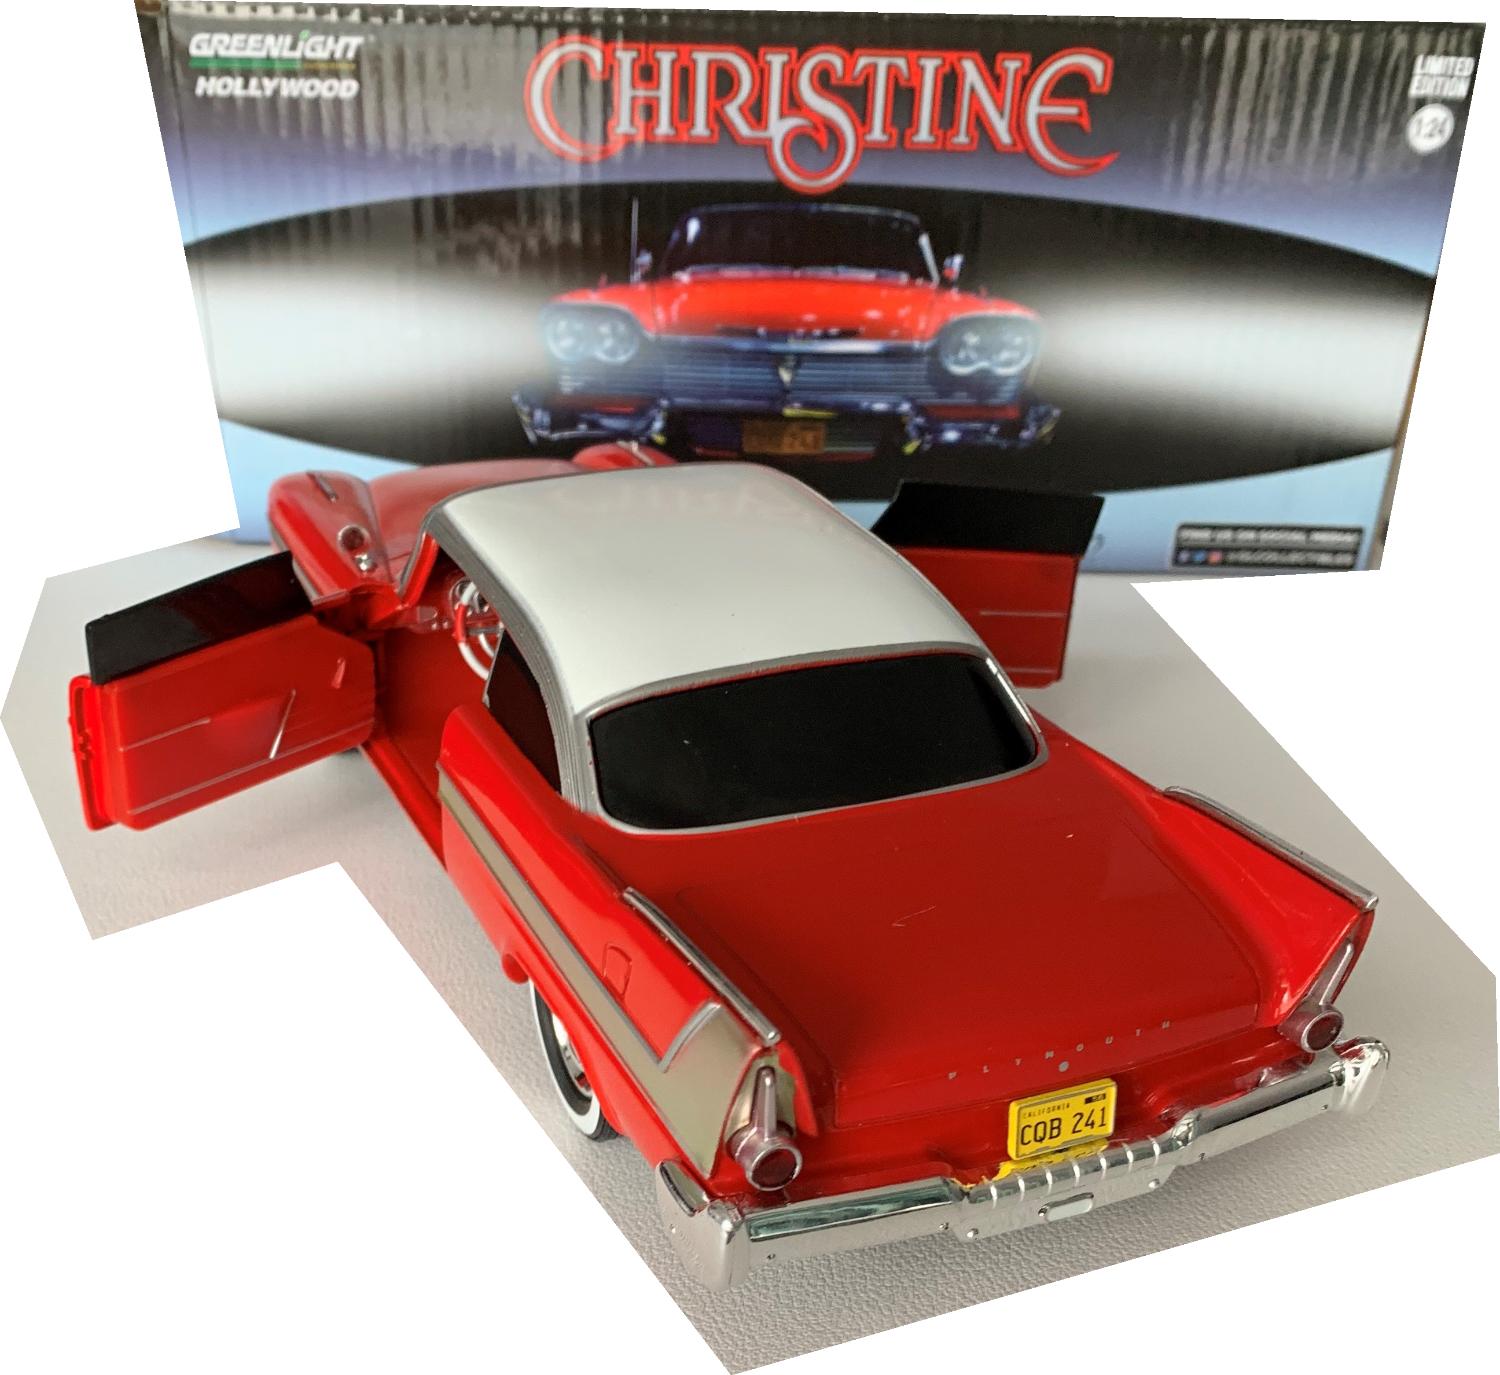 Christine 1958 Plymouth Fury (Evil Version) in red, 1:24 scale model, Greenlight